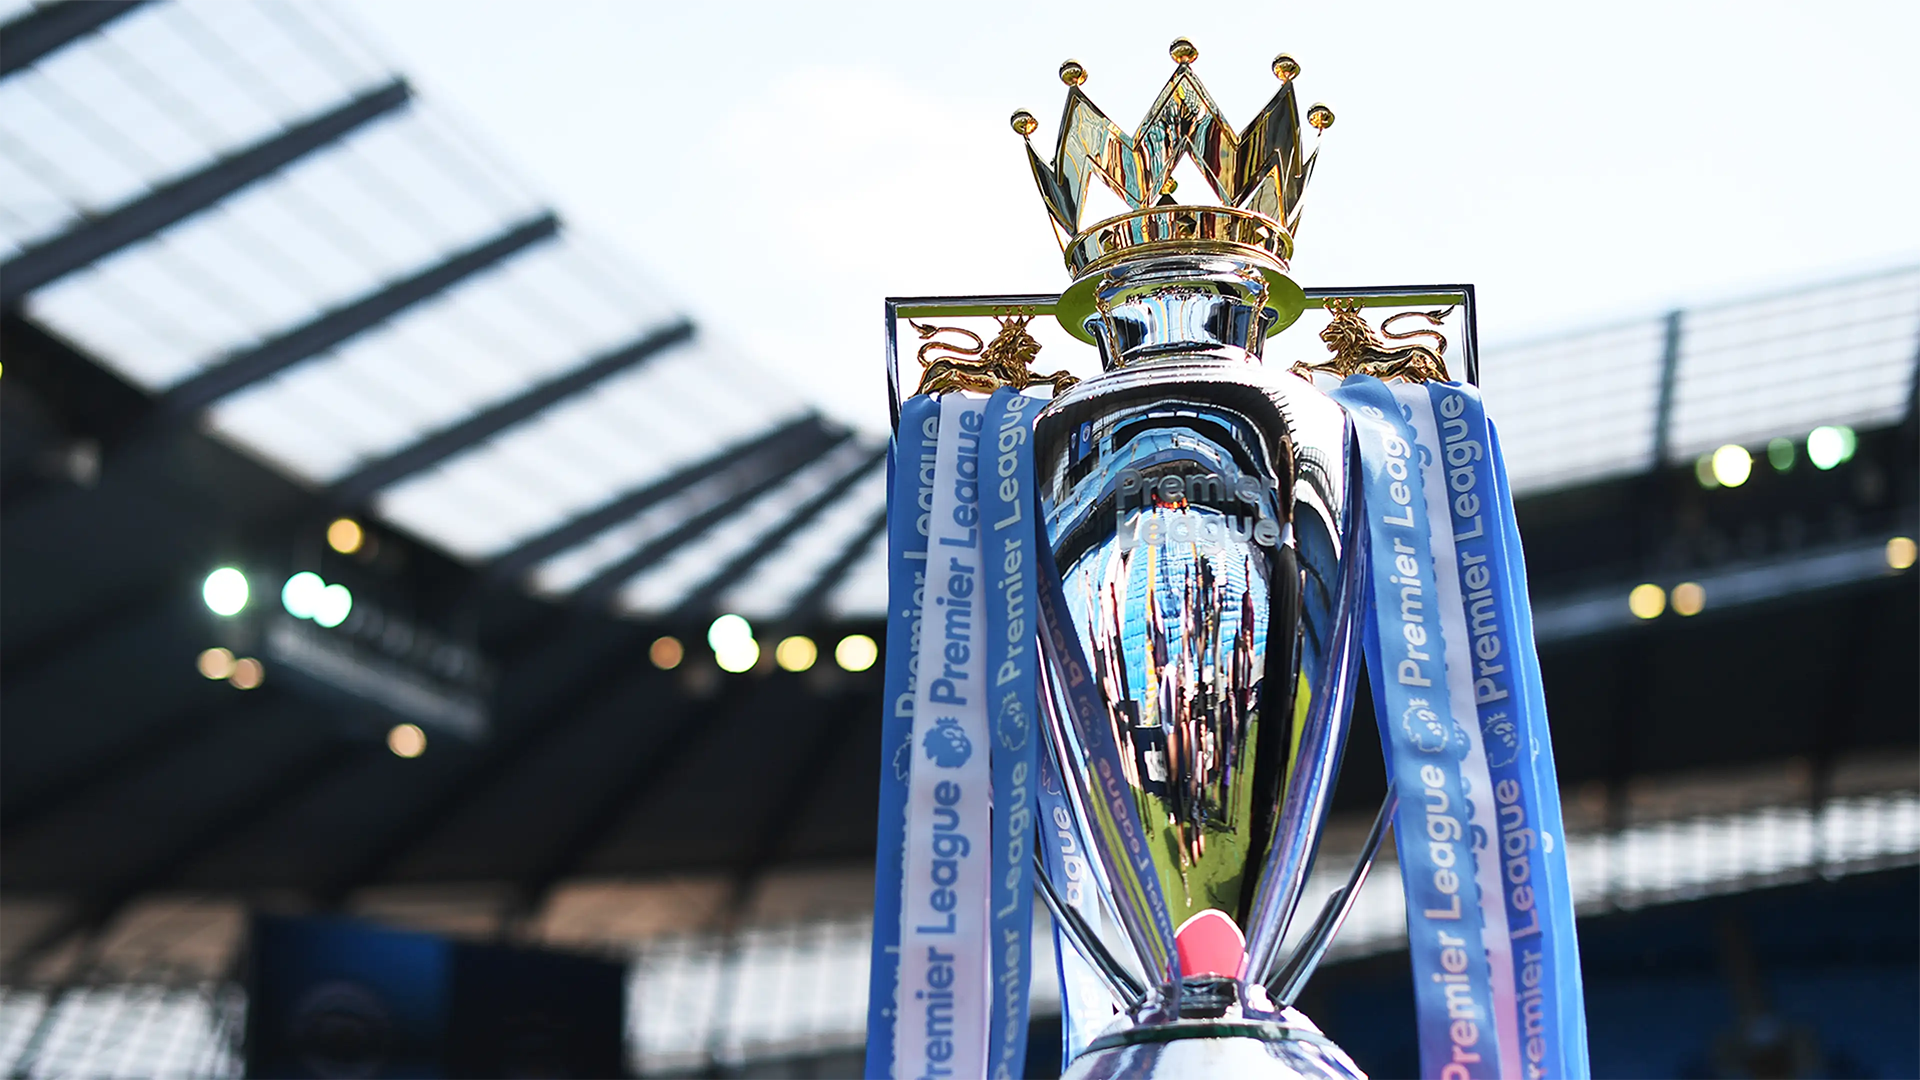 Where to watch the English Premier League (EPL) in Australia